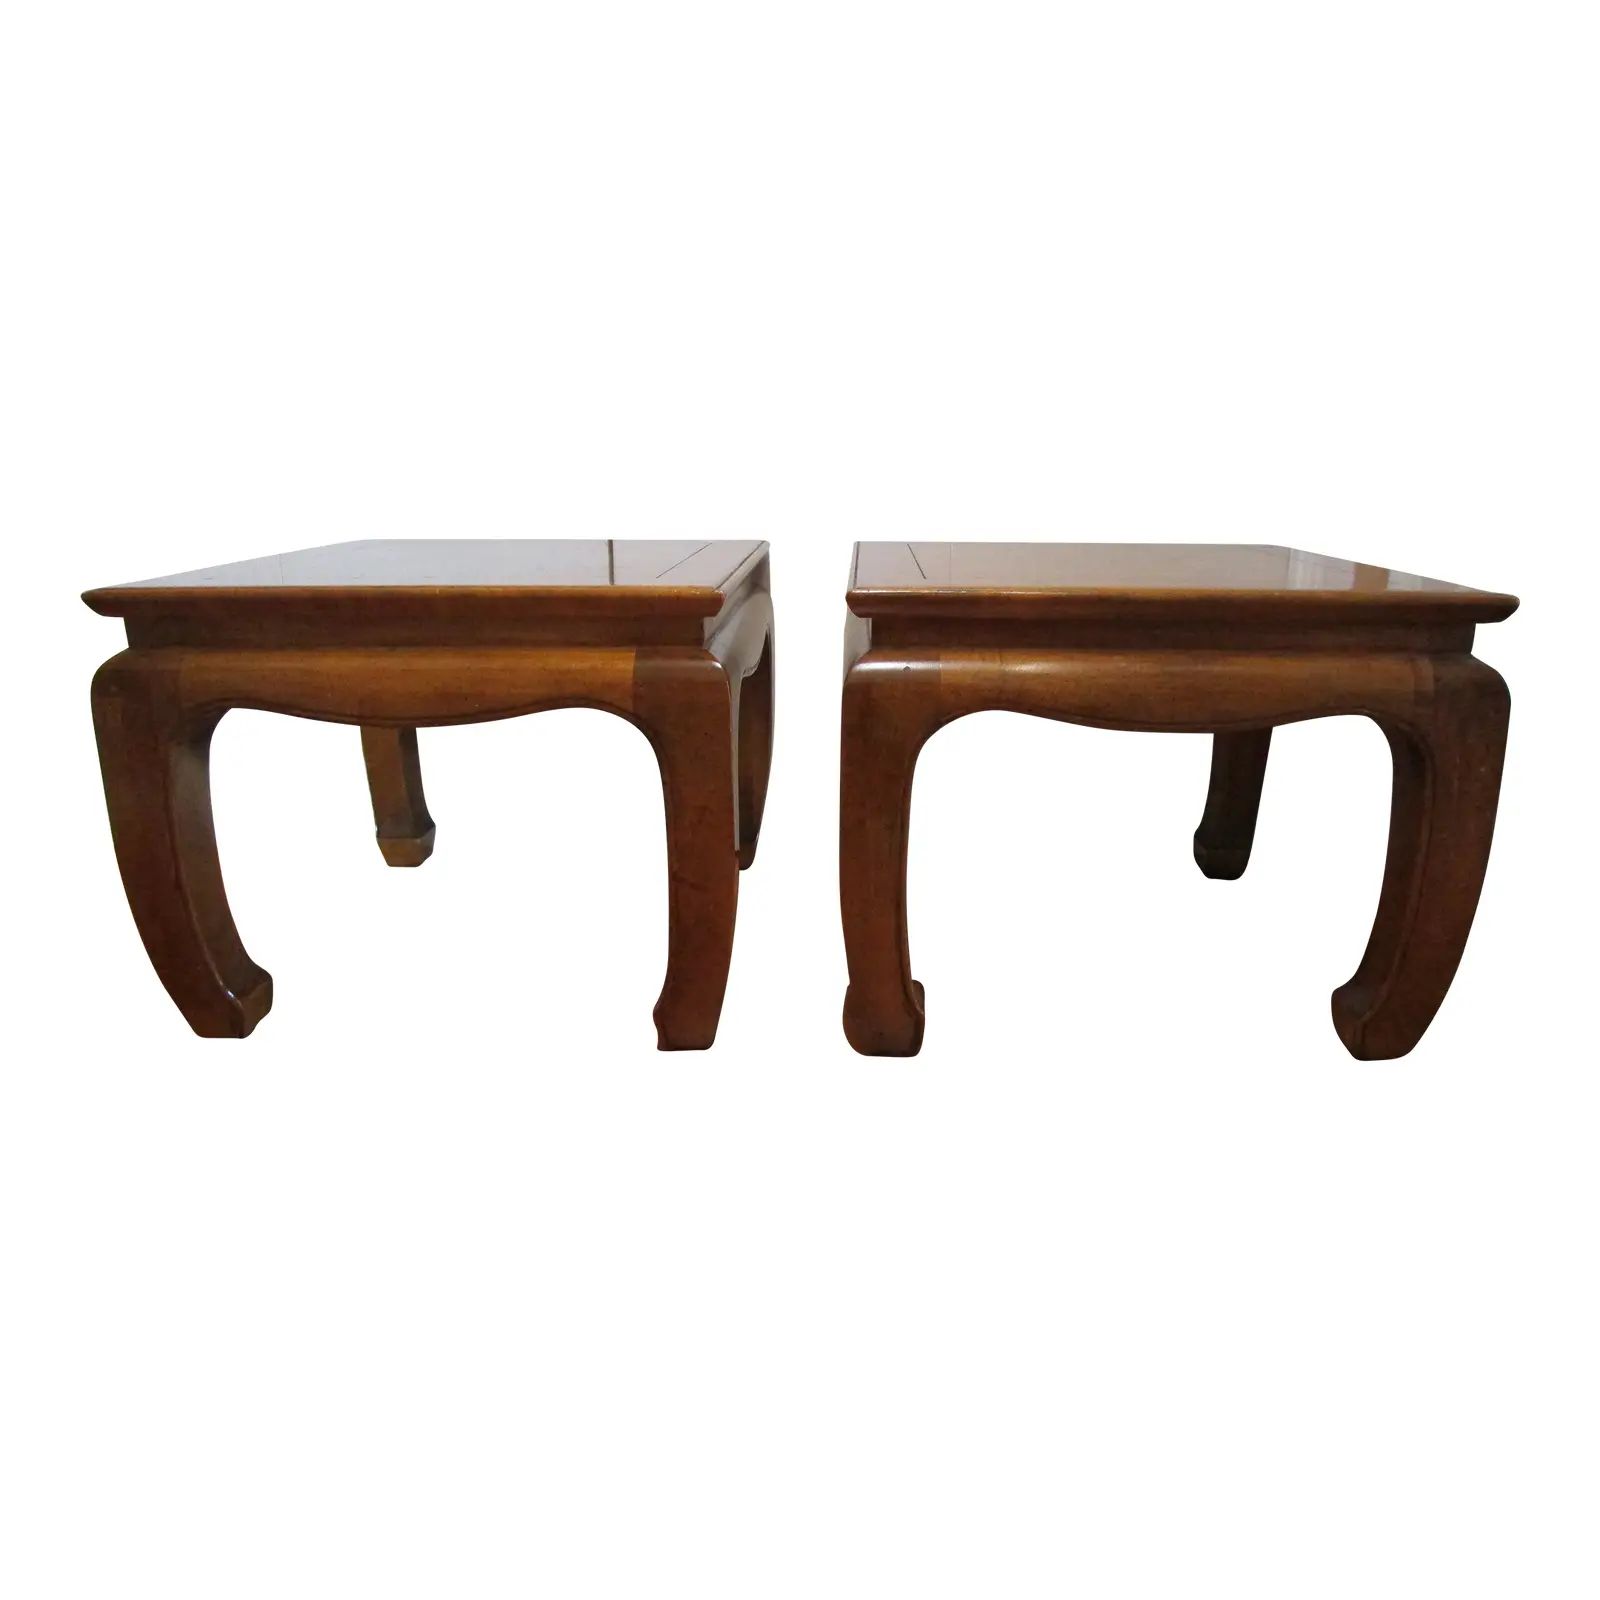 1970s Burl Wood Ming Style Side Tables - a Pair | Chairish